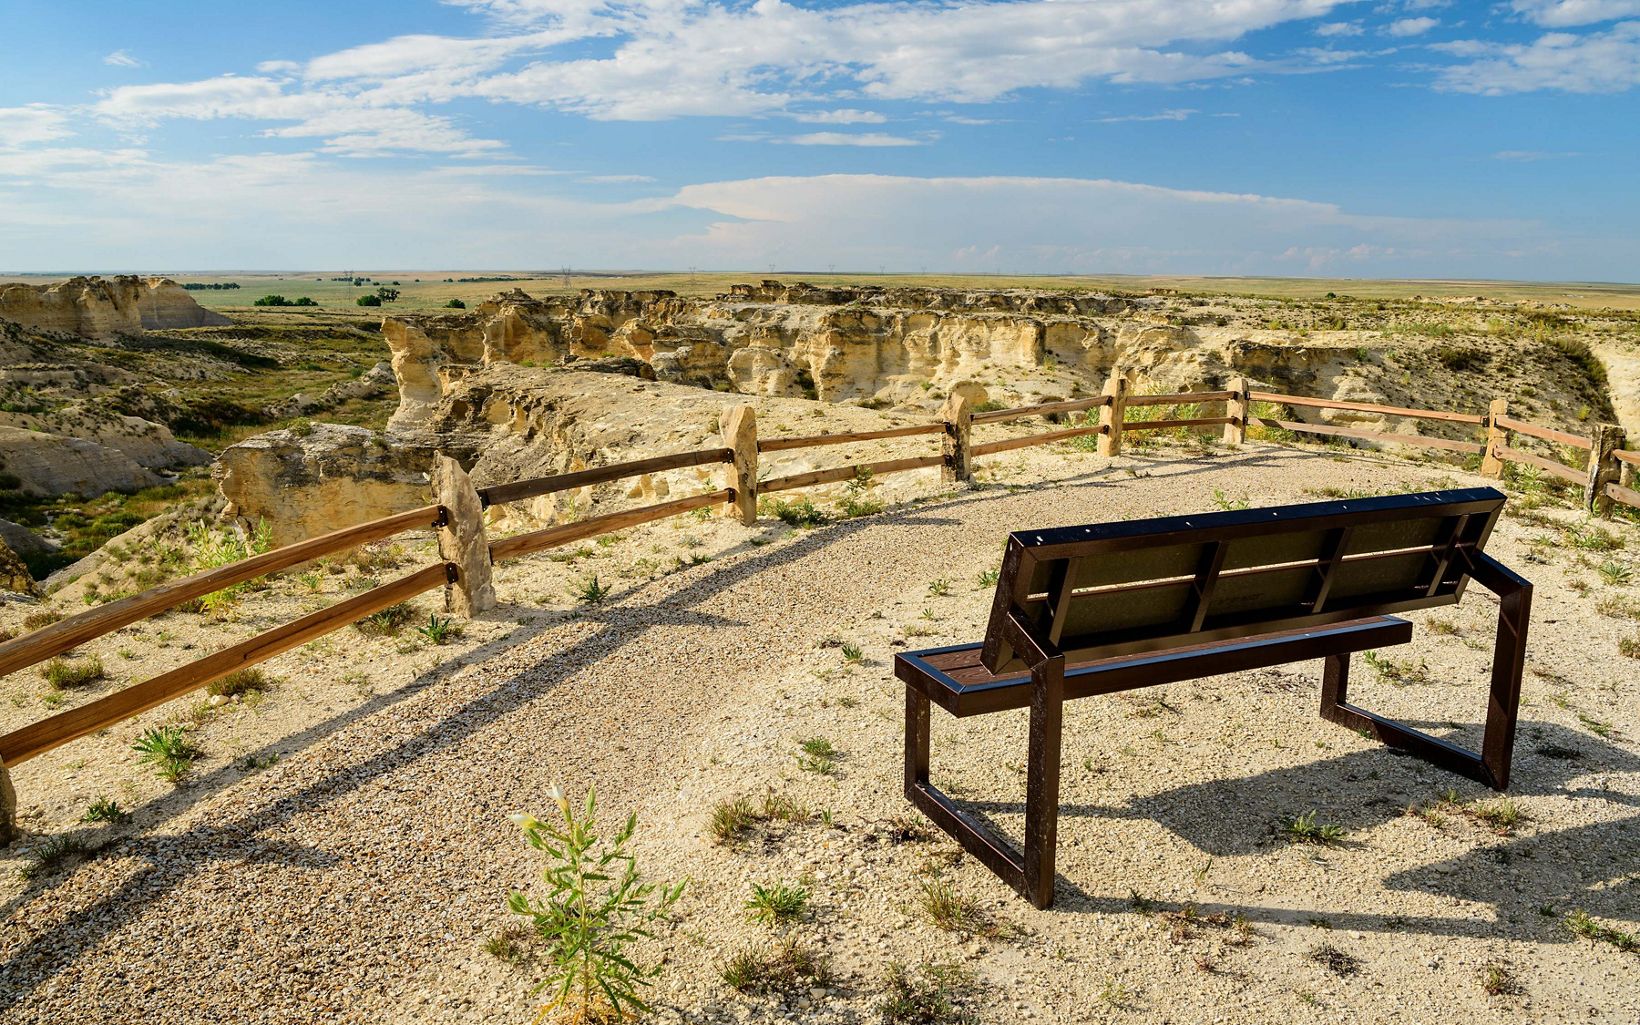 
                
                  Rest and revel in the vastness Take a moment to stop at Little Jerusalem Badlands State Park. The Rockies might take your breath away, but the spacious Kansas landscape will give it back again.
                  © Brian G. Schoenfish
                
              